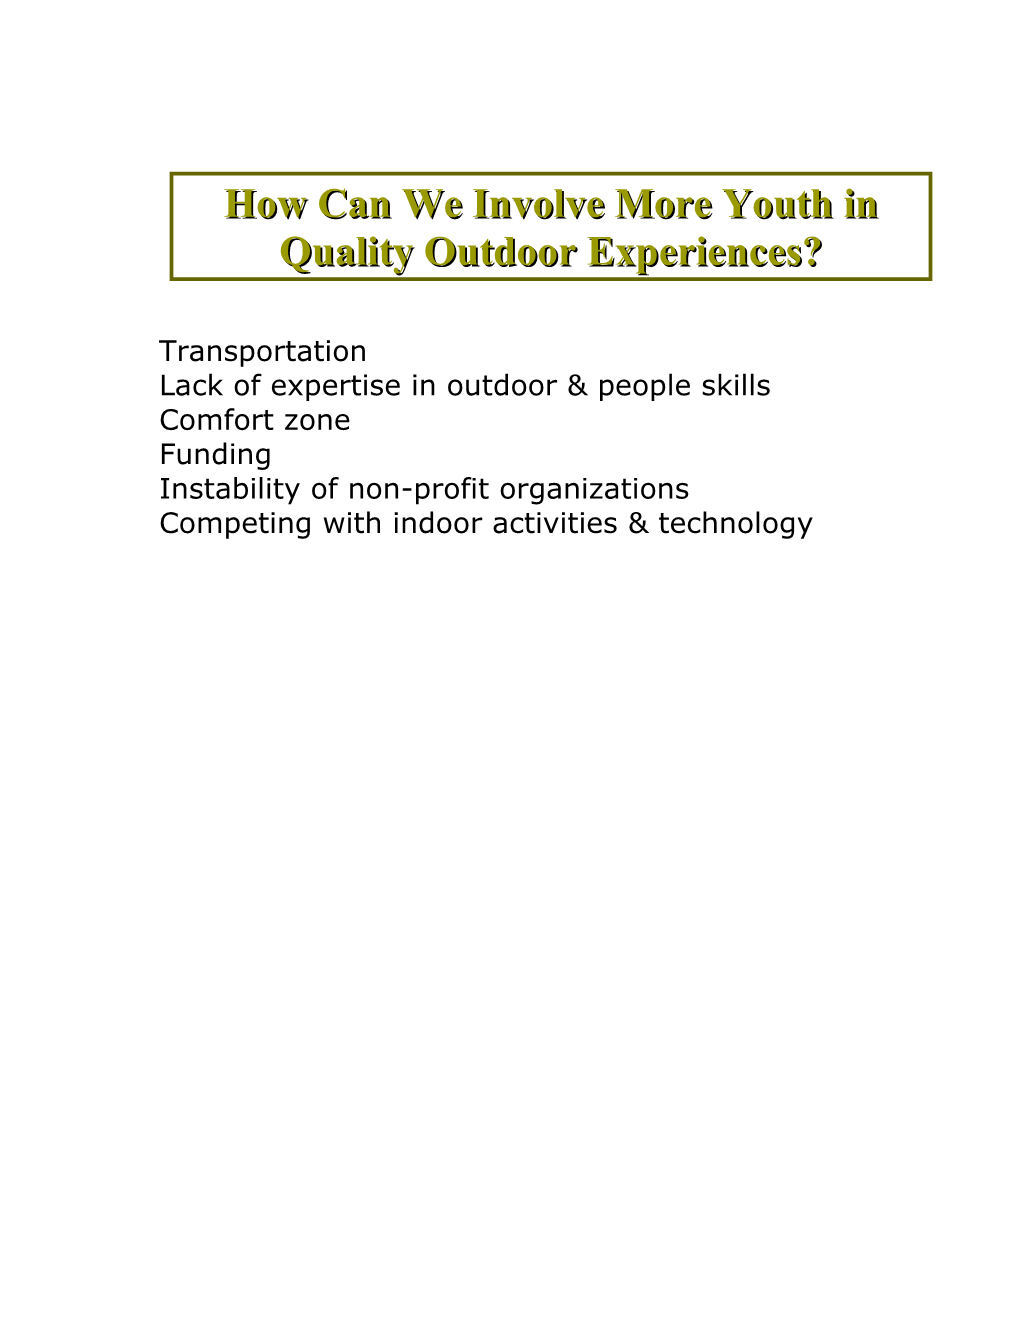 How Can We Involve More Youth in Outdoor Experiences